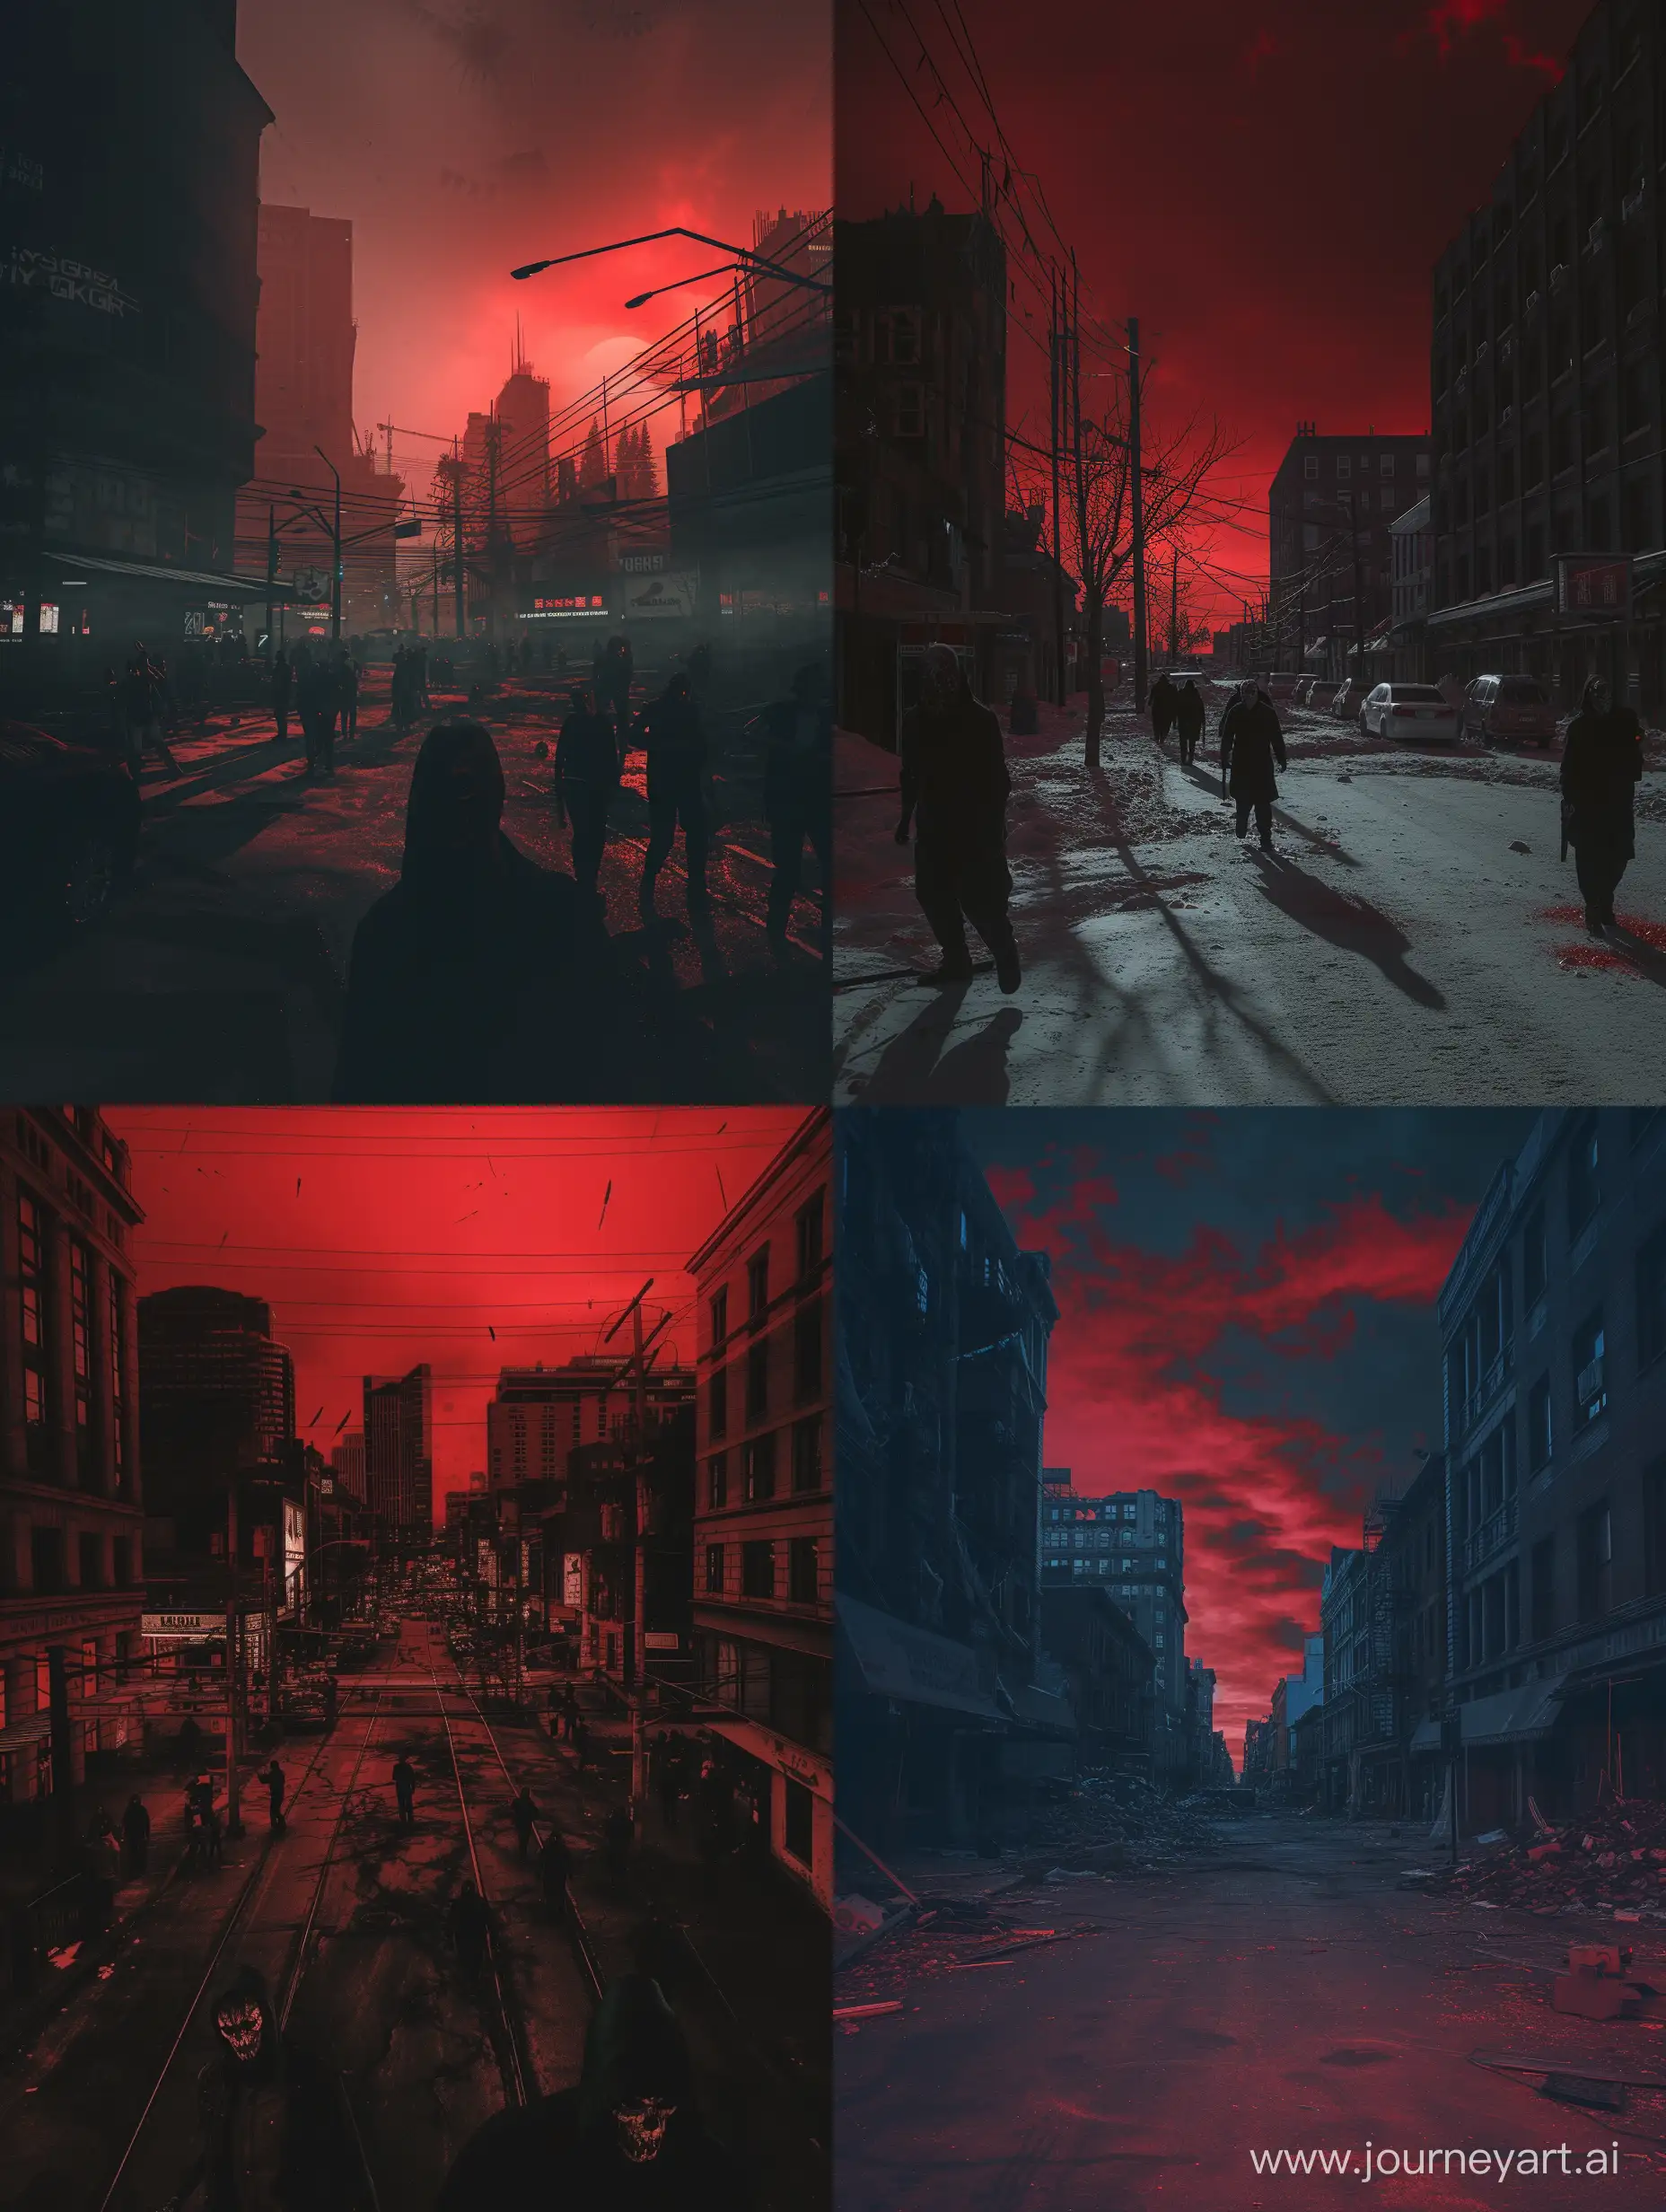 color photo of a dystopian city, its once bustling streets now transformed into a haunting nightmare during an unhinged version of the Purge. The composition captures the eerie atmosphere as twisted individuals, adorned in horrifying masks, roam the desolate streets, indulging in sadistic acts of violence and terror. The lighting is low-key, casting long, ominous shadows that enhance the sinister ambiance. Taken with a high-end DSLR camera, the wide-angle lens (24mm) captures the vastness of the city and the chaos unfolding within it. The scene is captured using a high contrast style, emphasizing deep blacks and stark highlights, intensifying the gritty and oppressive mood. The red filter applied during post-processing creates an otherworldly red hue in the sky, symbolizing the blood-soaked night that has befallen the city, nightmare fuel, horror core